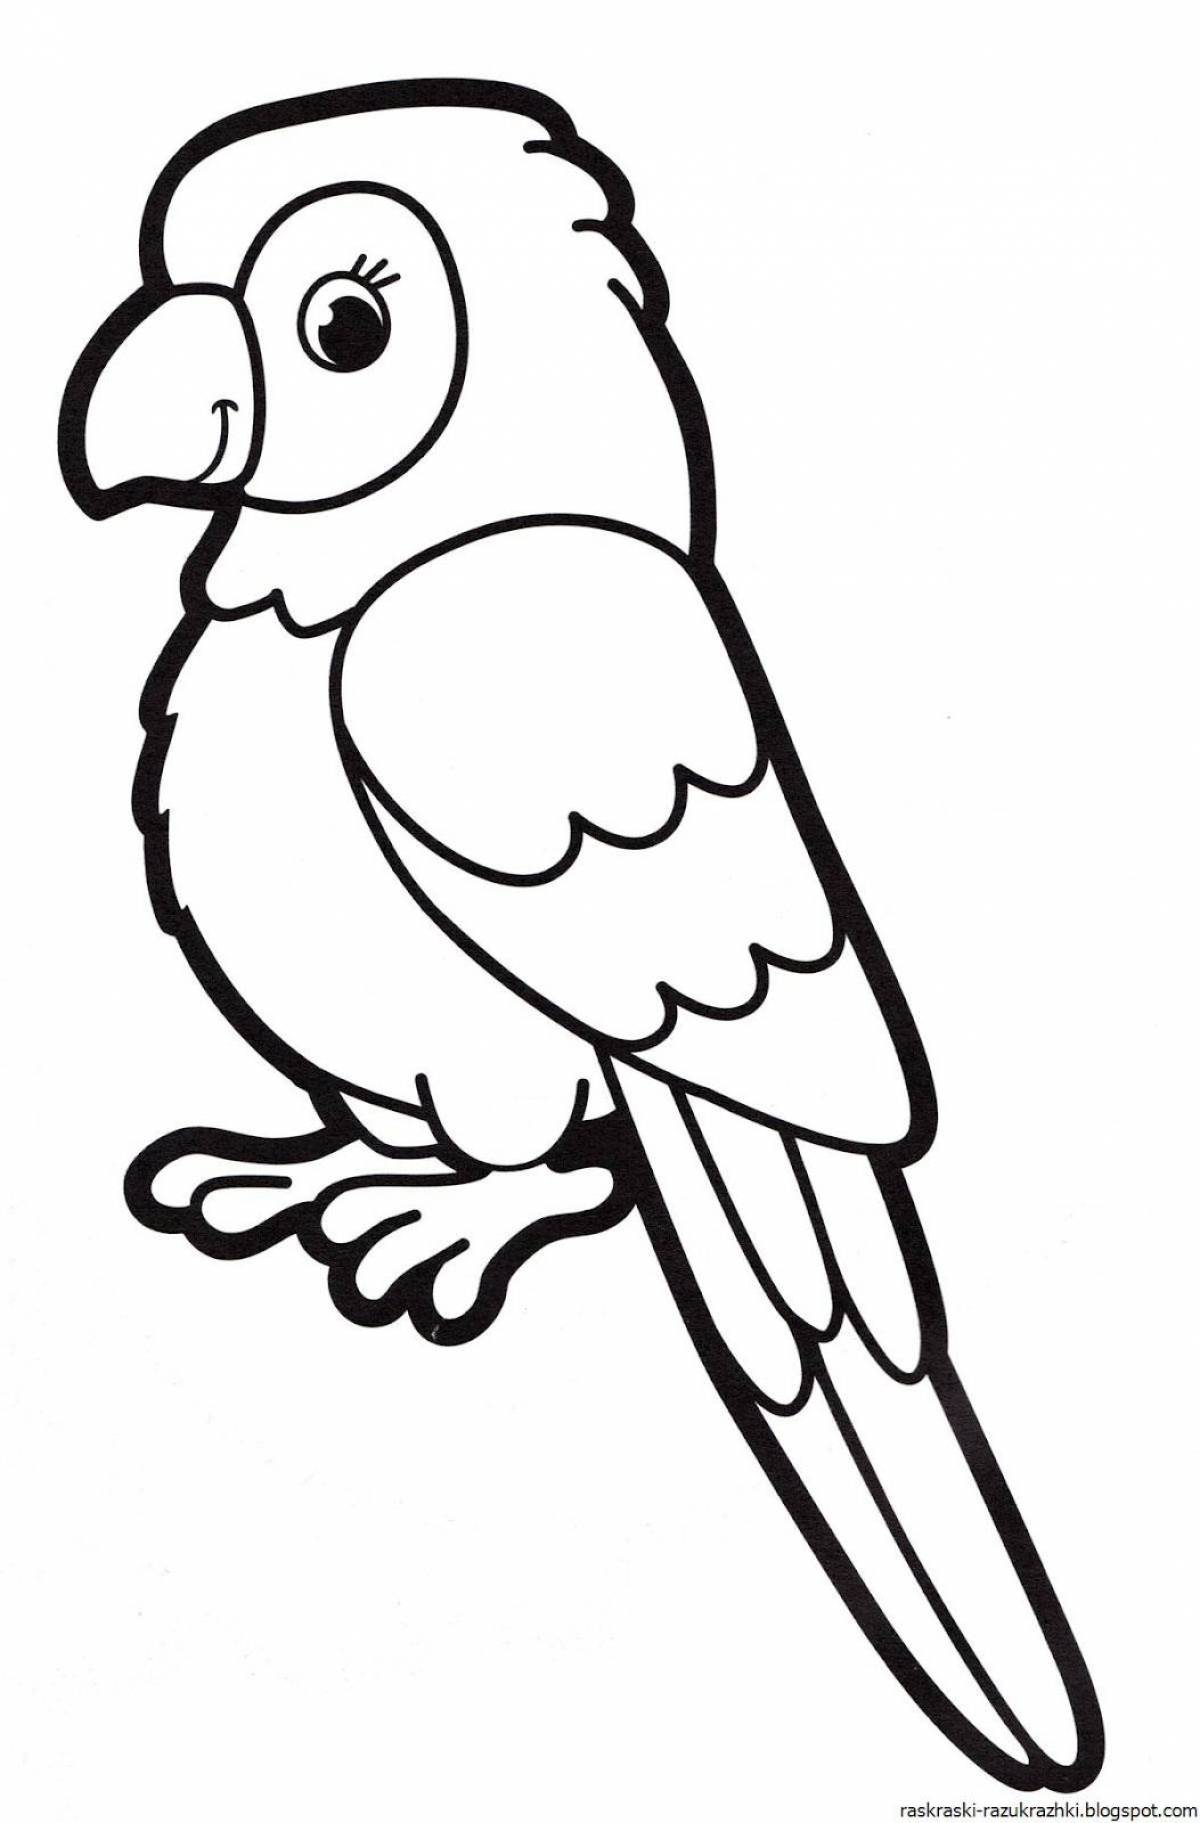 Intriguing parrot coloring book for kids